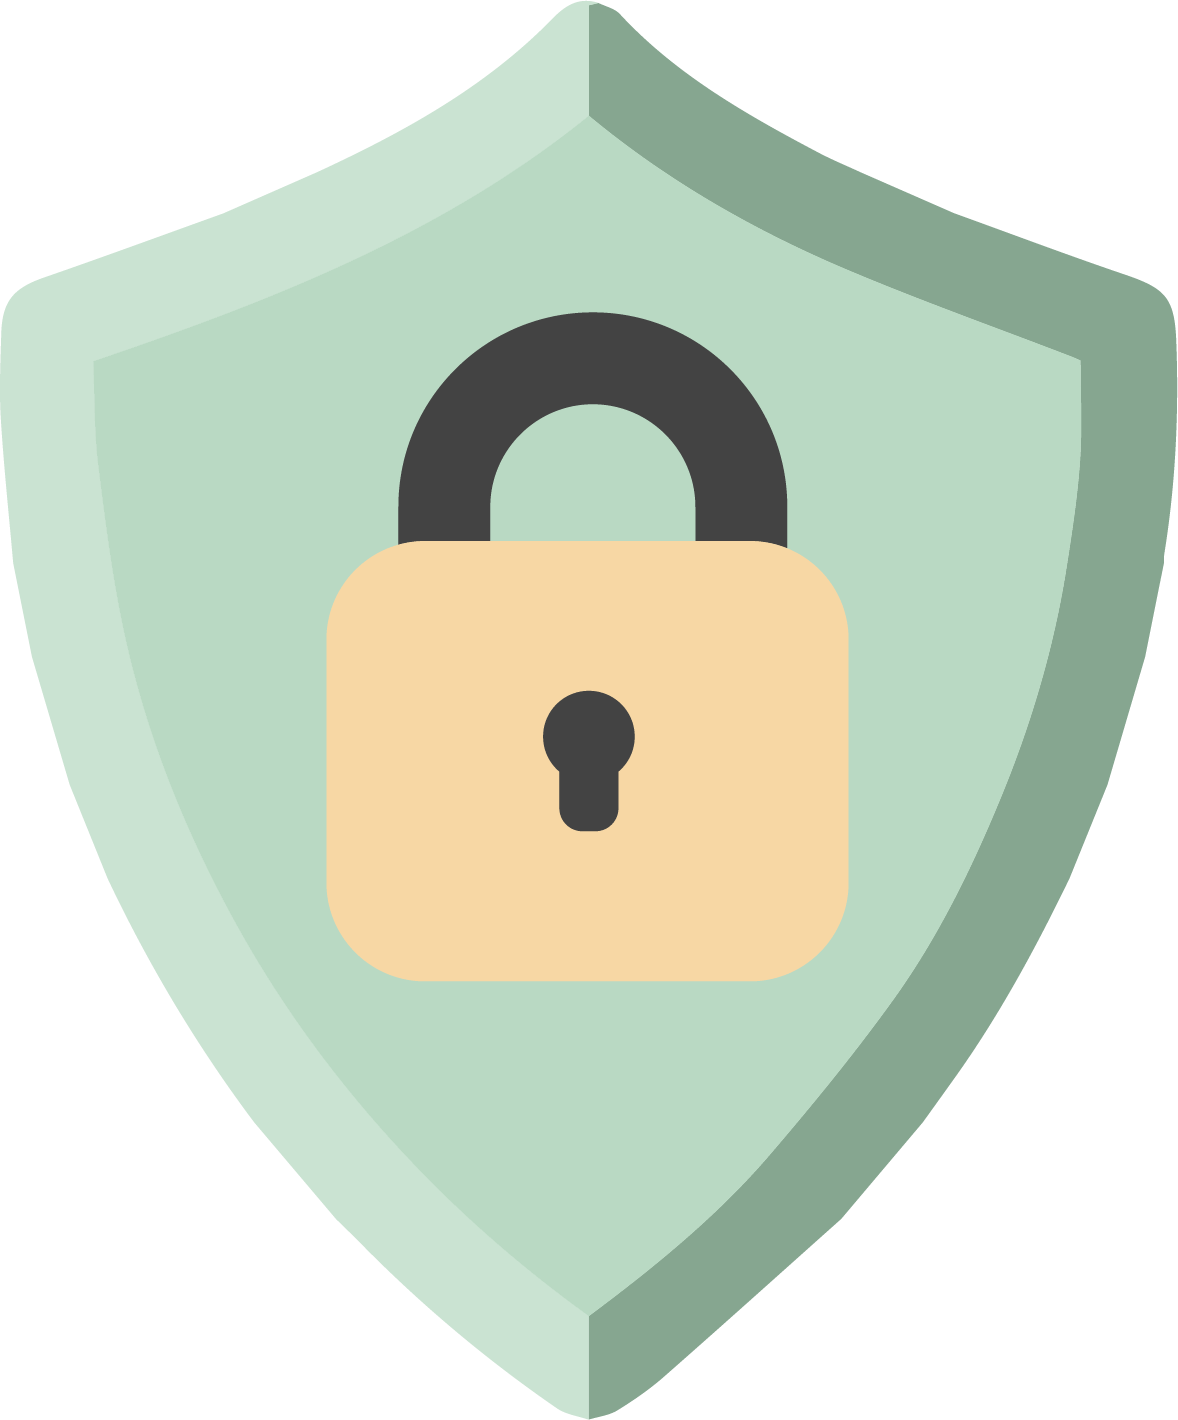 Cyber Security Badge Icon. Shield with a lock in it.